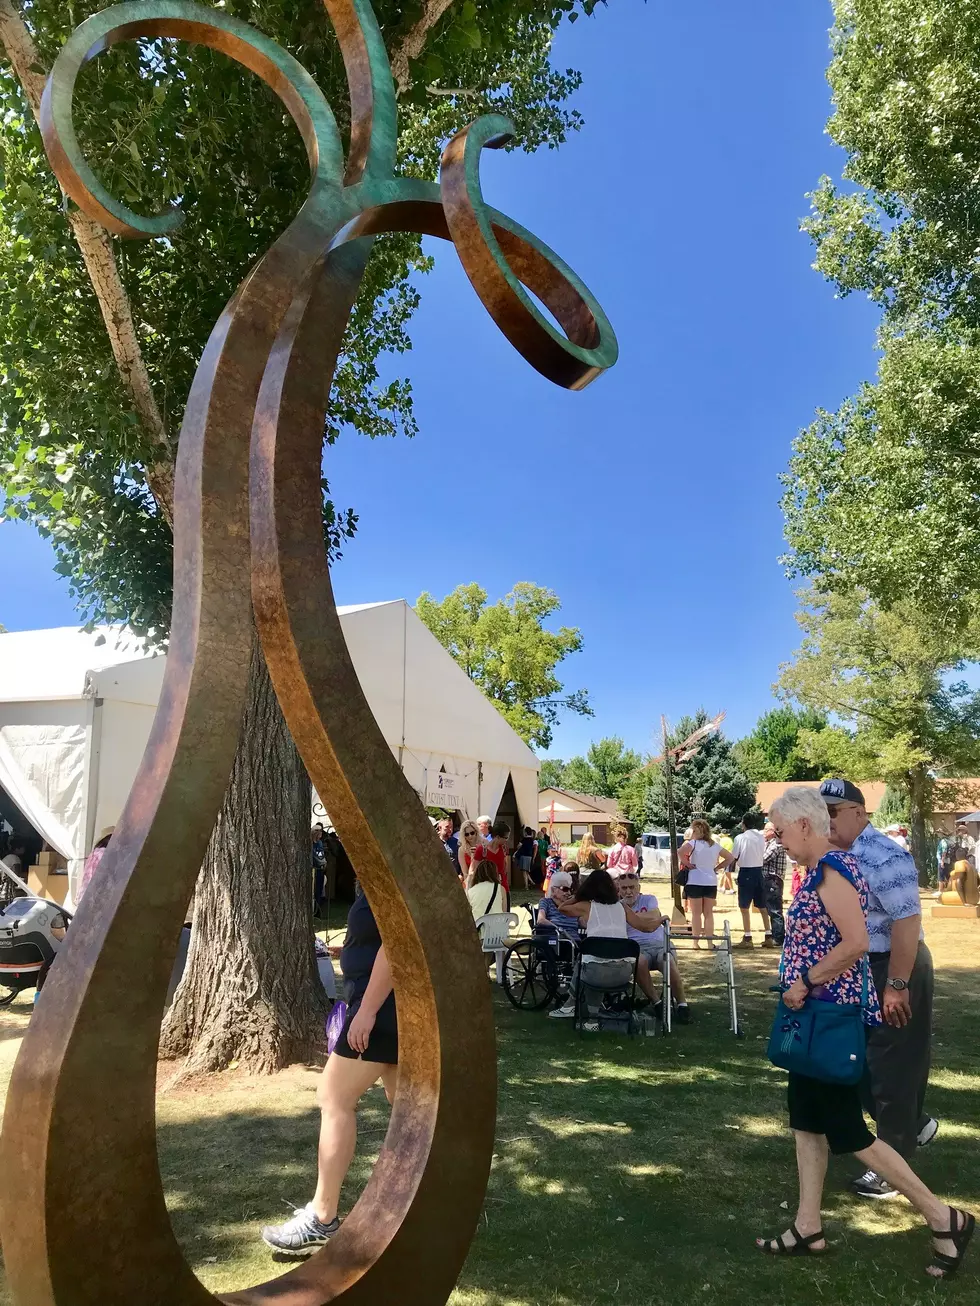 Over 2,000 Sculptures to be Displayed at 38th Annual Sculpture Show in Loveland